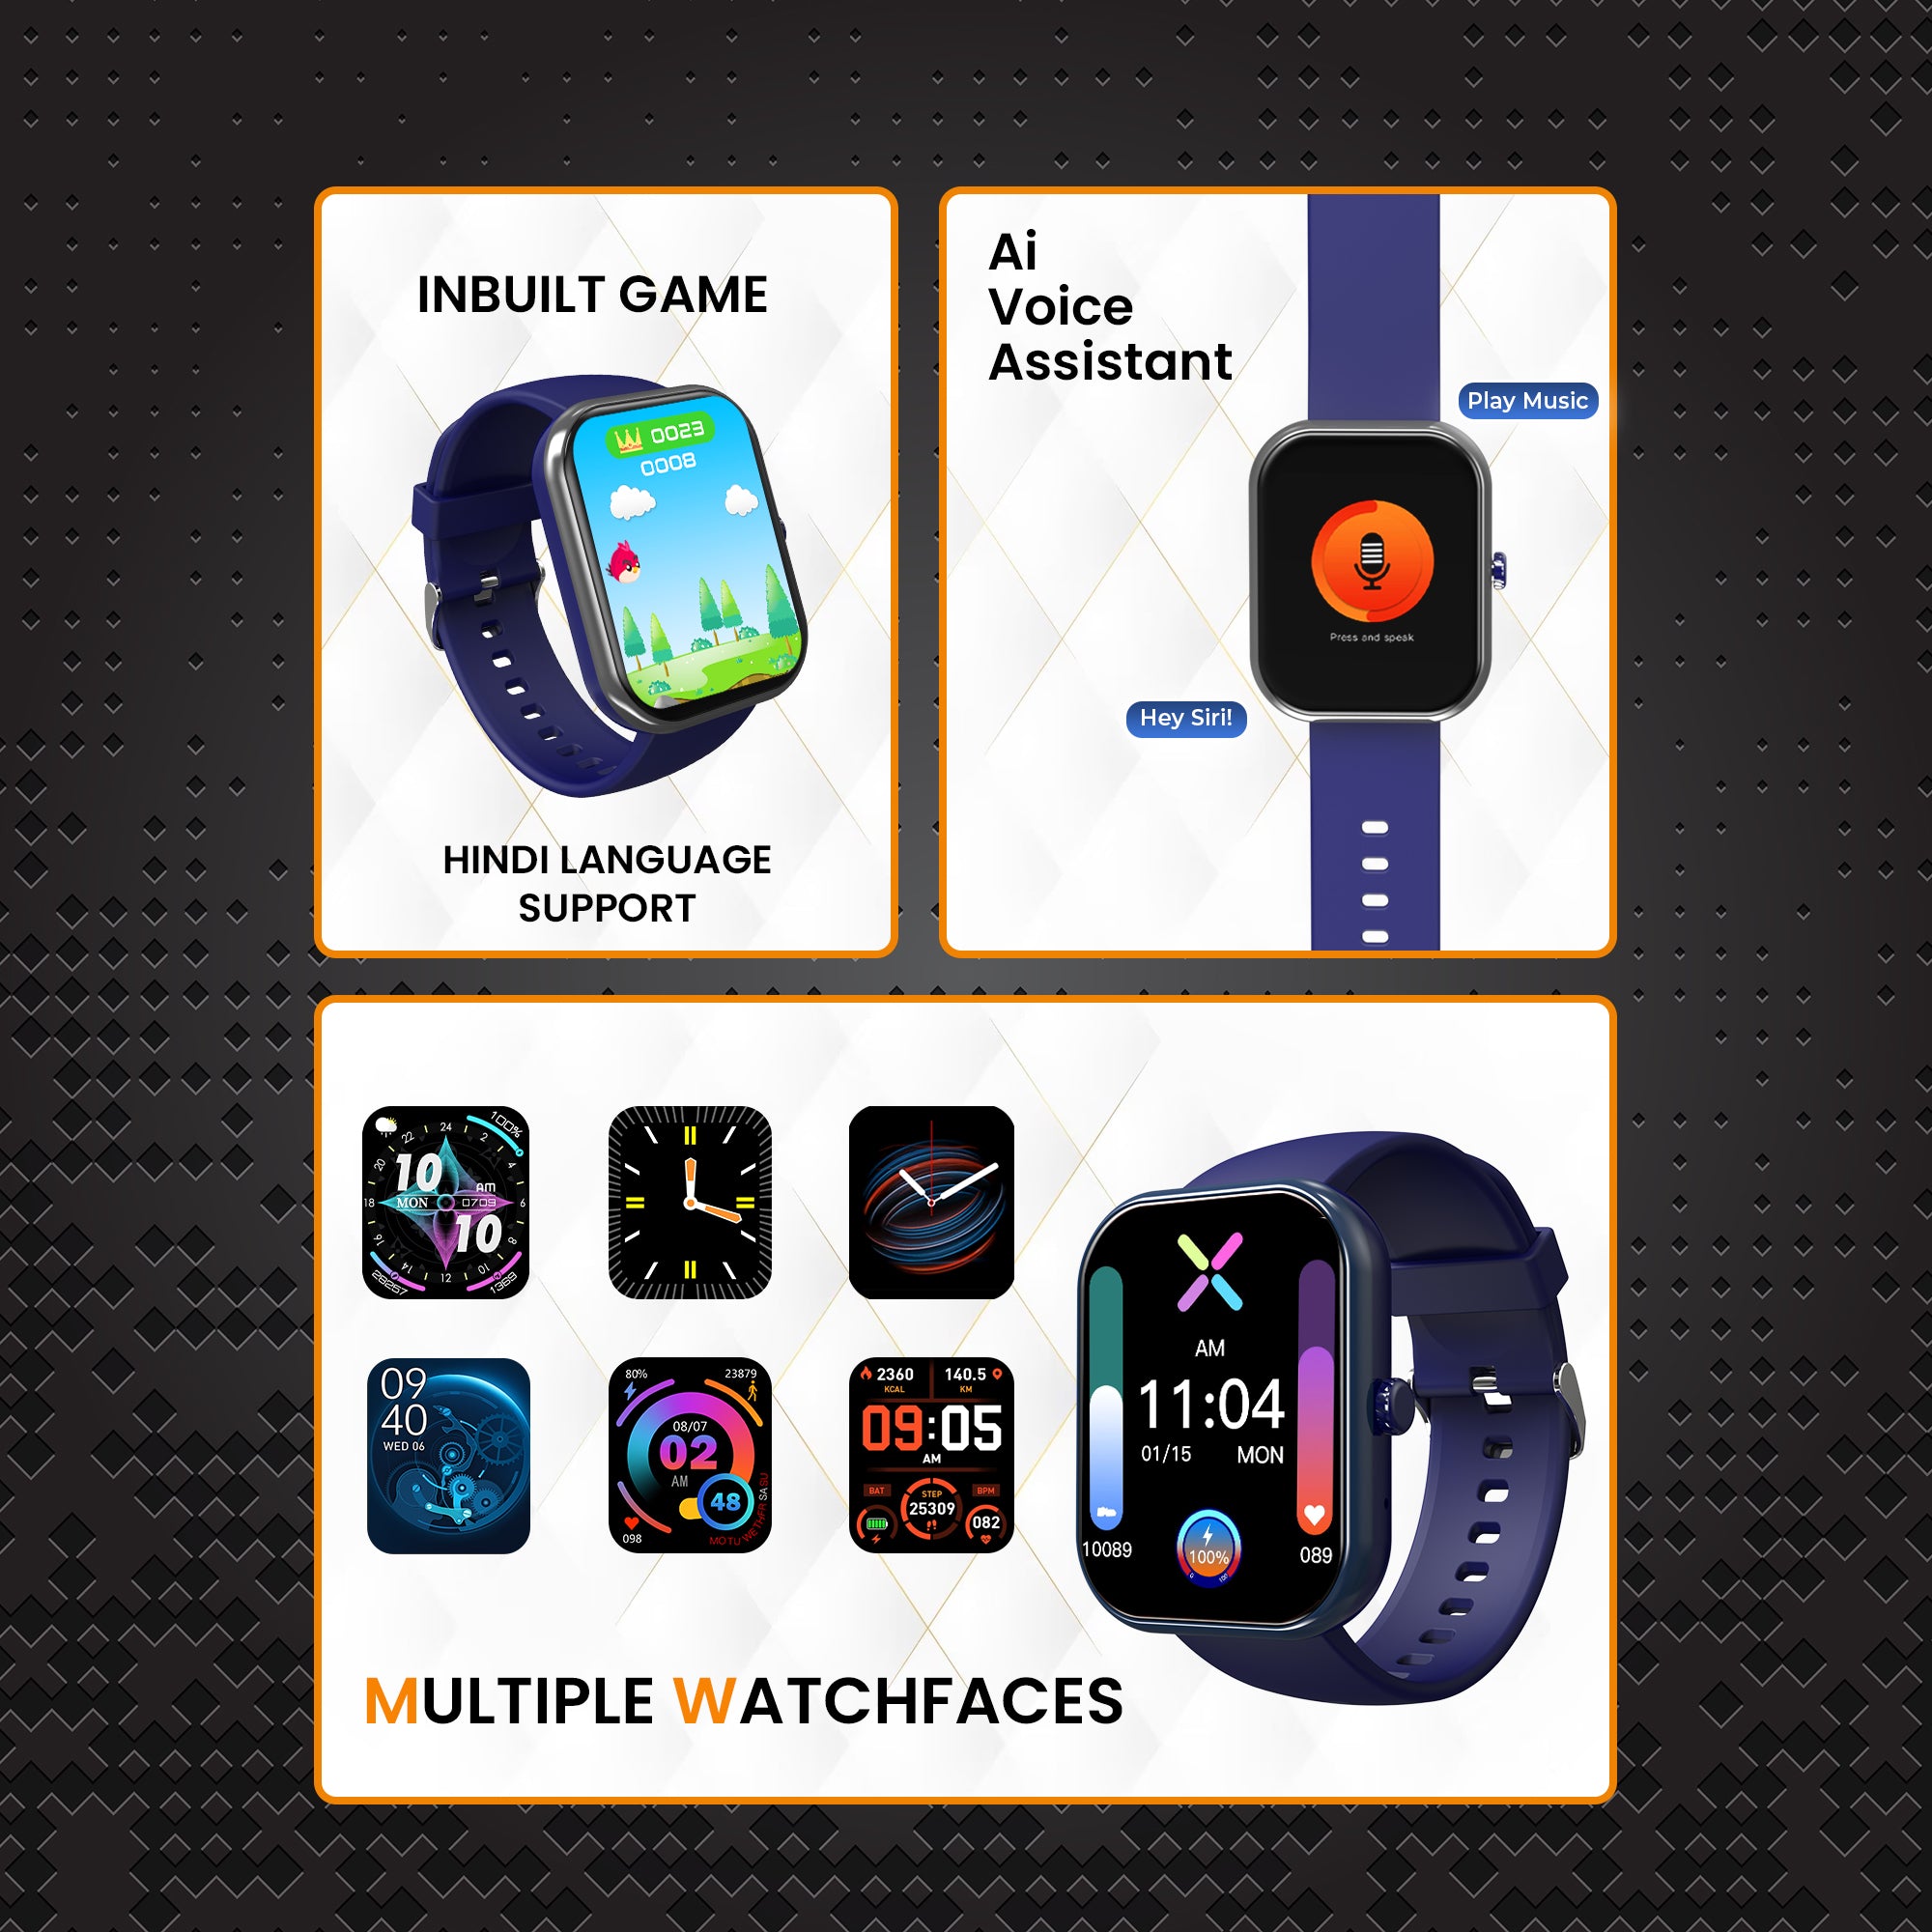 GIZMORE Ultra Max 2.01 (5.11 cm) Always-On-Big Display | 600 NITS Brightness & Split Screen | AI Voice Assistance | Rotating Crown | Health Suite | Bluetooth Calling Smart Watch for Men and Women